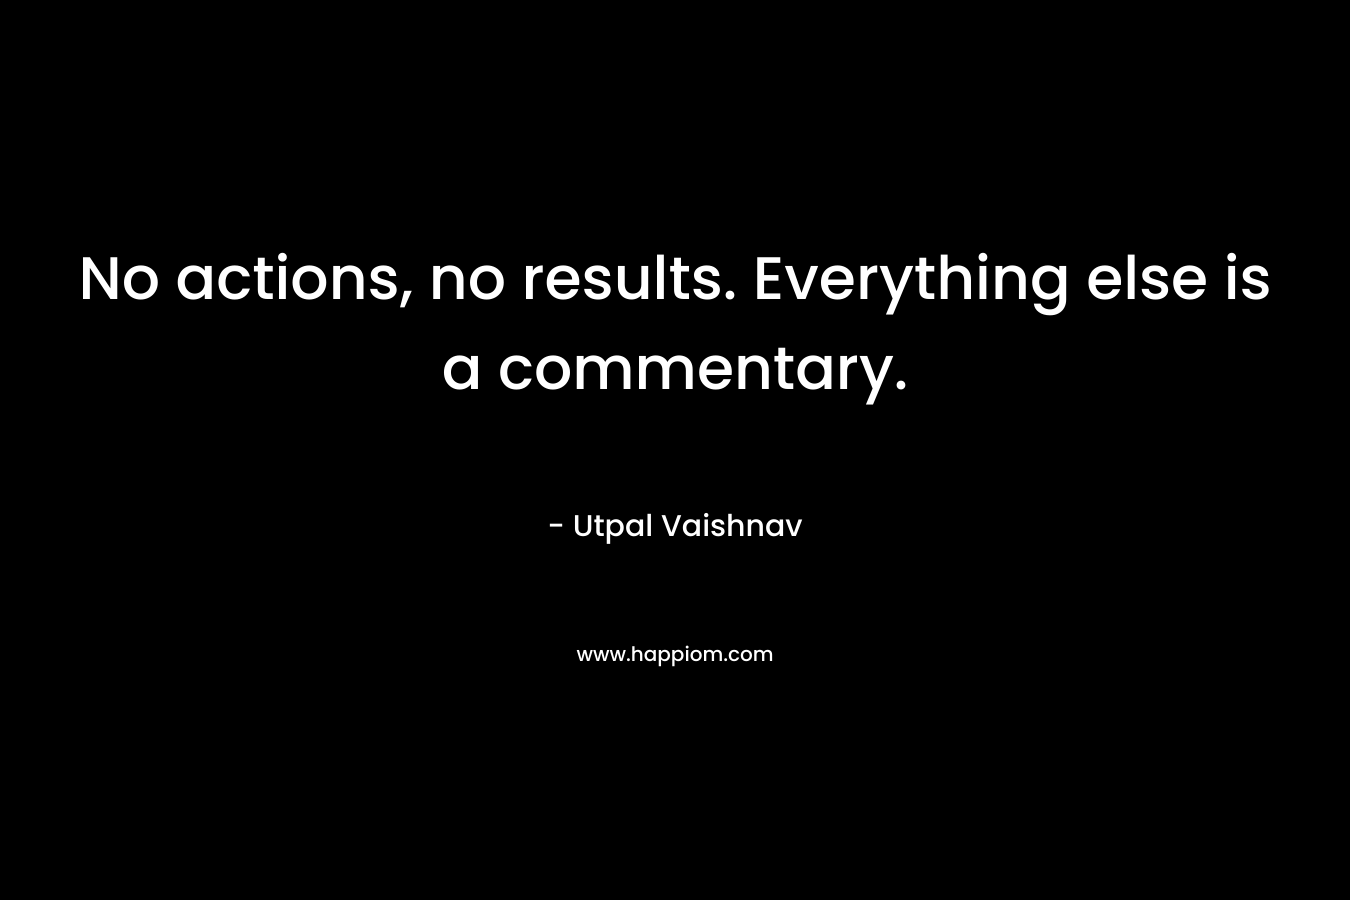 No actions, no results. Everything else is a commentary. – Utpal Vaishnav